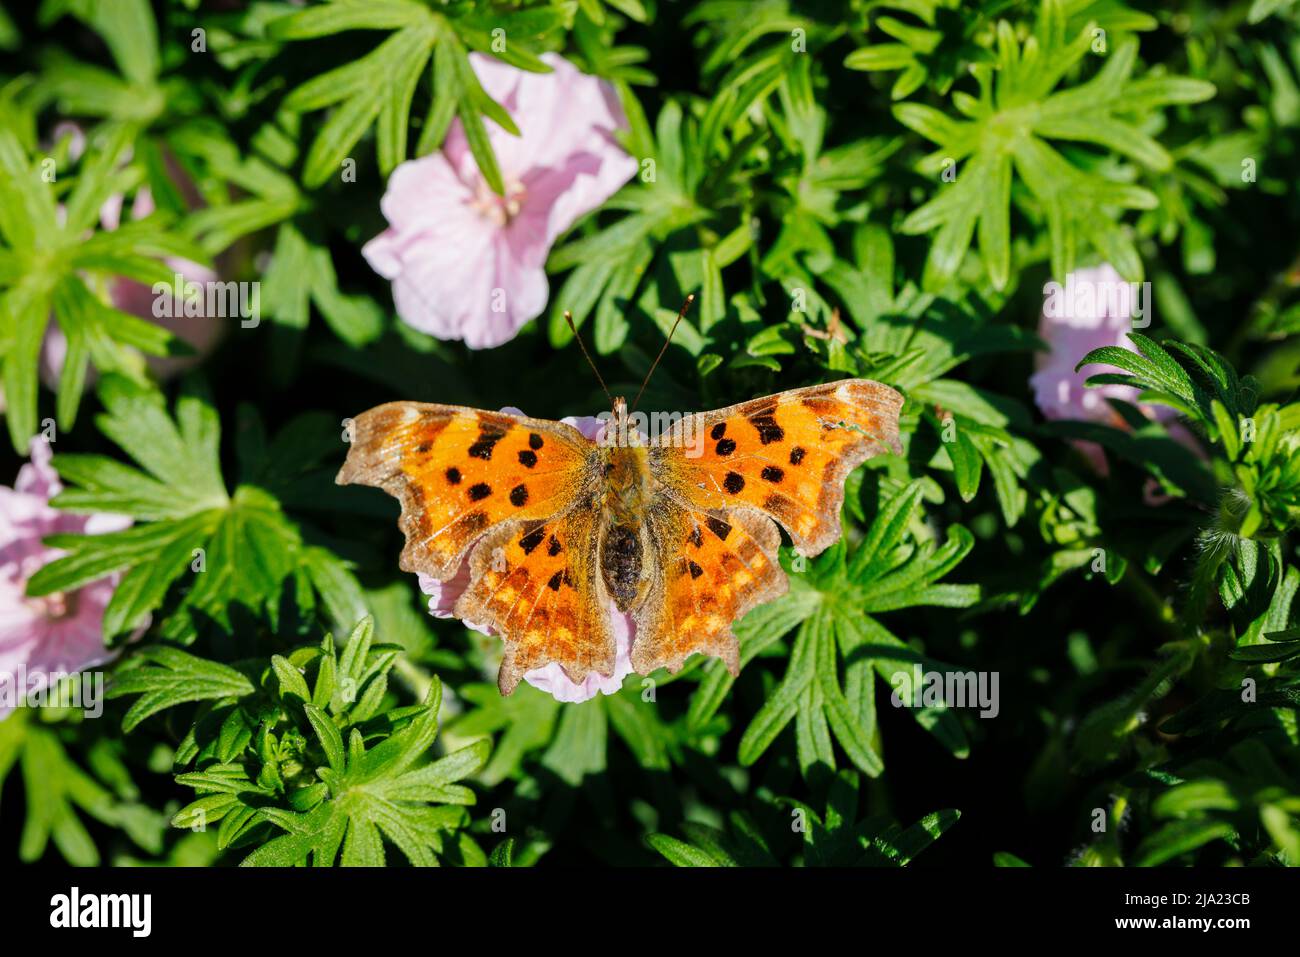 Orange and black mottled Large Tortoiseshell (Nymphalis polychloros) butterfly on a Geranium sanguineum plant in a garden in Surrey, southeast England Stock Photo